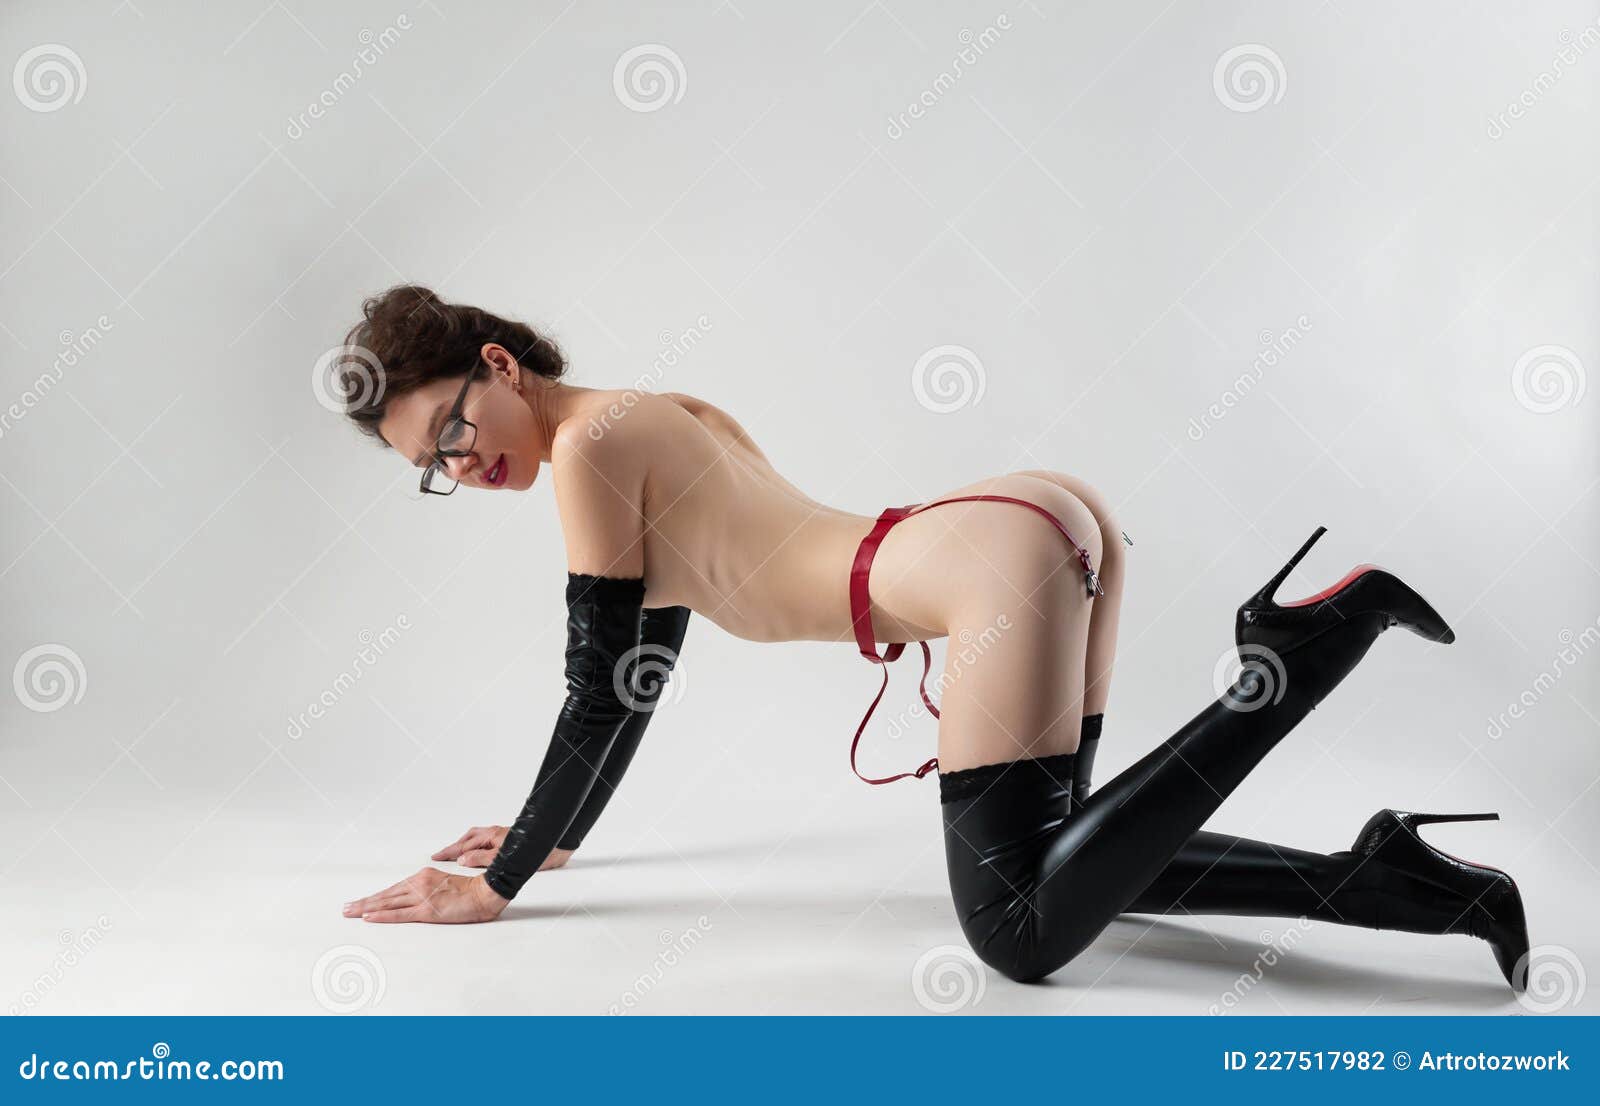 The Naked Woman in Latex Stockings and Gloves Bdsm Mistress for Sex Games on the Floor on Her Knees Stock Photo